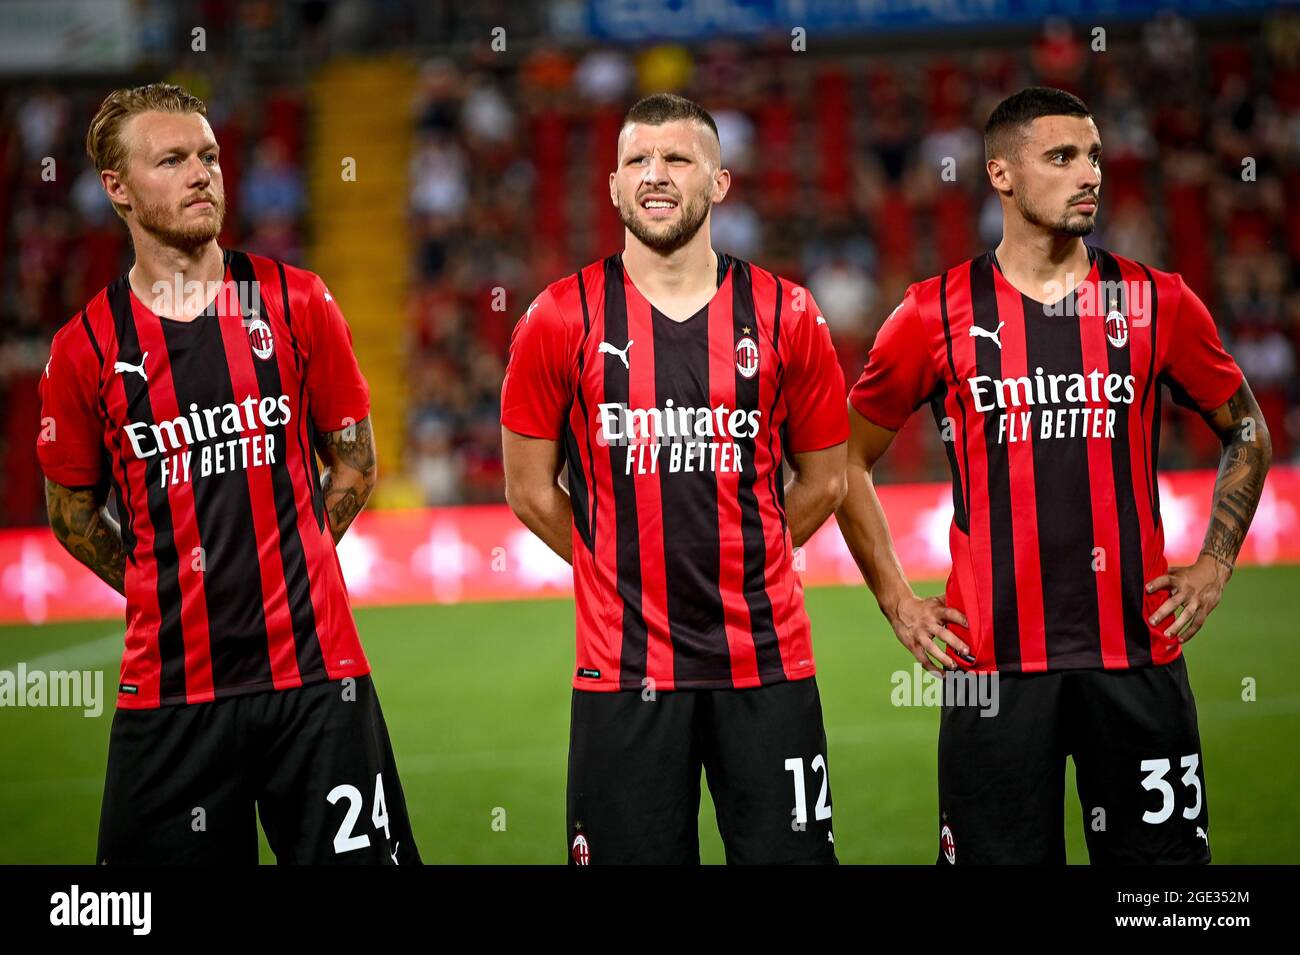 Trieste, Italy. 14th Aug, 2021. Line up AC Milan with Simon Kjaer, Ante  Rebic, Rade Krunic during AC Milan vs Panathinaikos FC, friendly football  match in Trieste, Italy, August 14 2021 Credit: